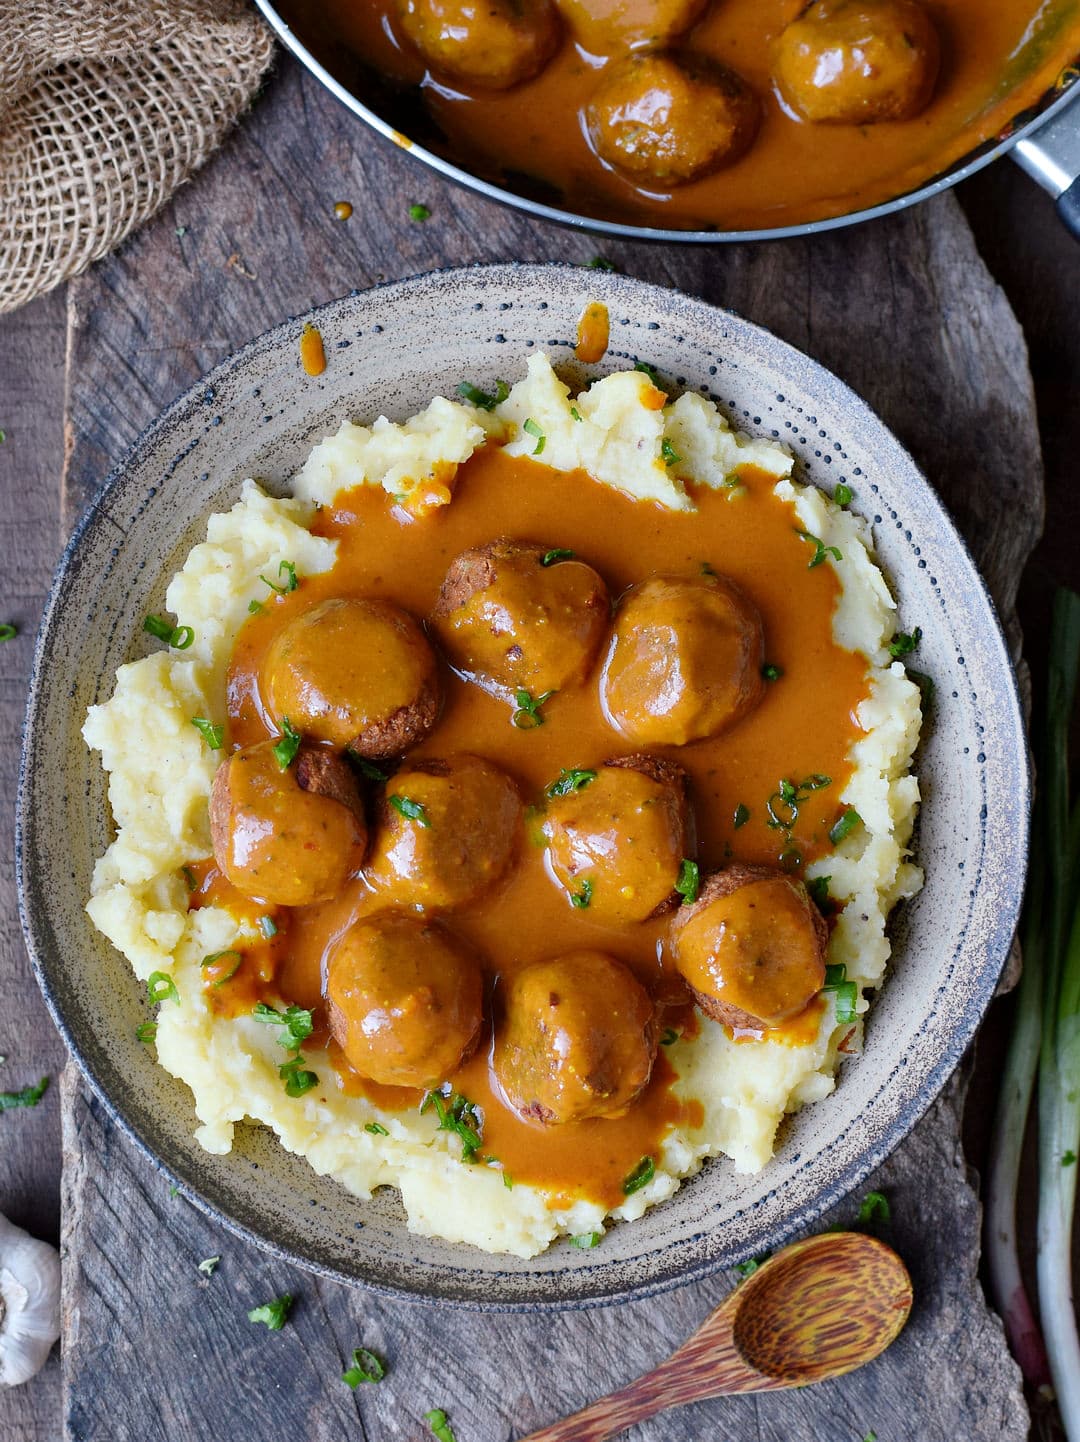 Black bean meatballs in a bowl with curry gravy over mashed potatoes